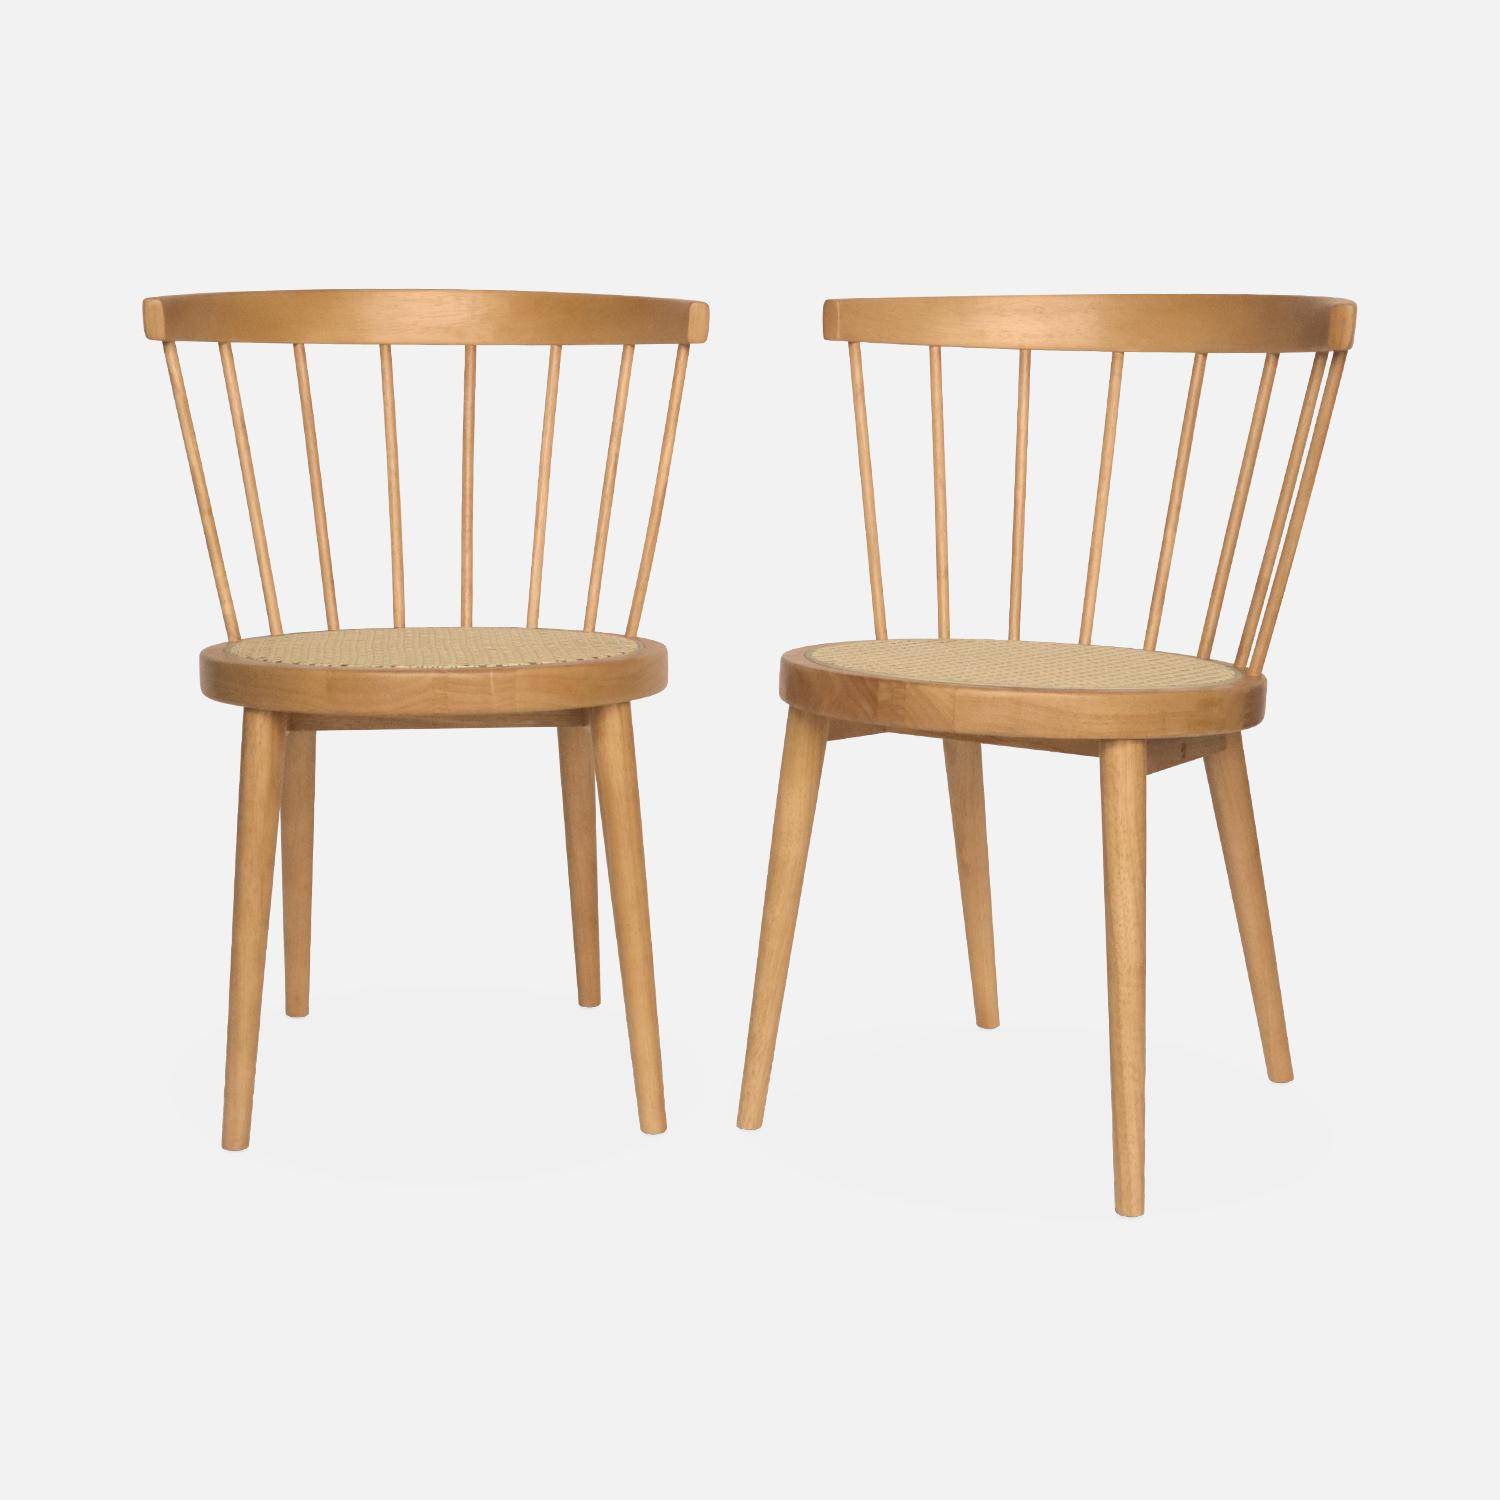 Pair of  Wood and Cane Chairs, Bohemian Spirit, Natural, L53 x W53.5 x H 6 cm Photo4